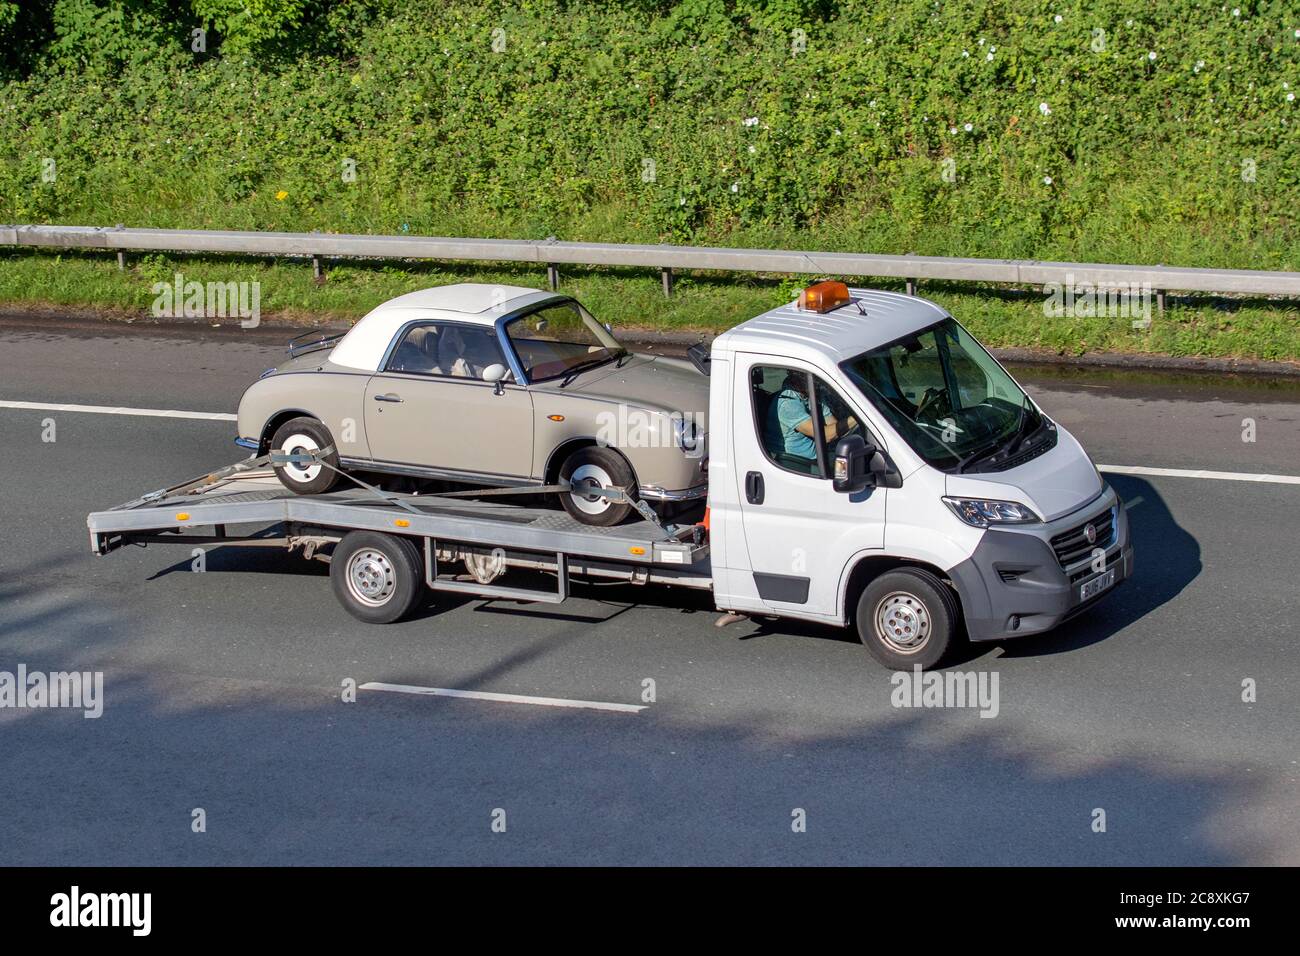 2016 Fiat Ducato 35 Multijet LWB S- low loader, car transport carrying veteran classic car, cherished veteran, restored old timer, collectible motors, vintage heritage, old preserved Nissan Figaro, collectable car on the m6 Motorway, UK Stock Photo